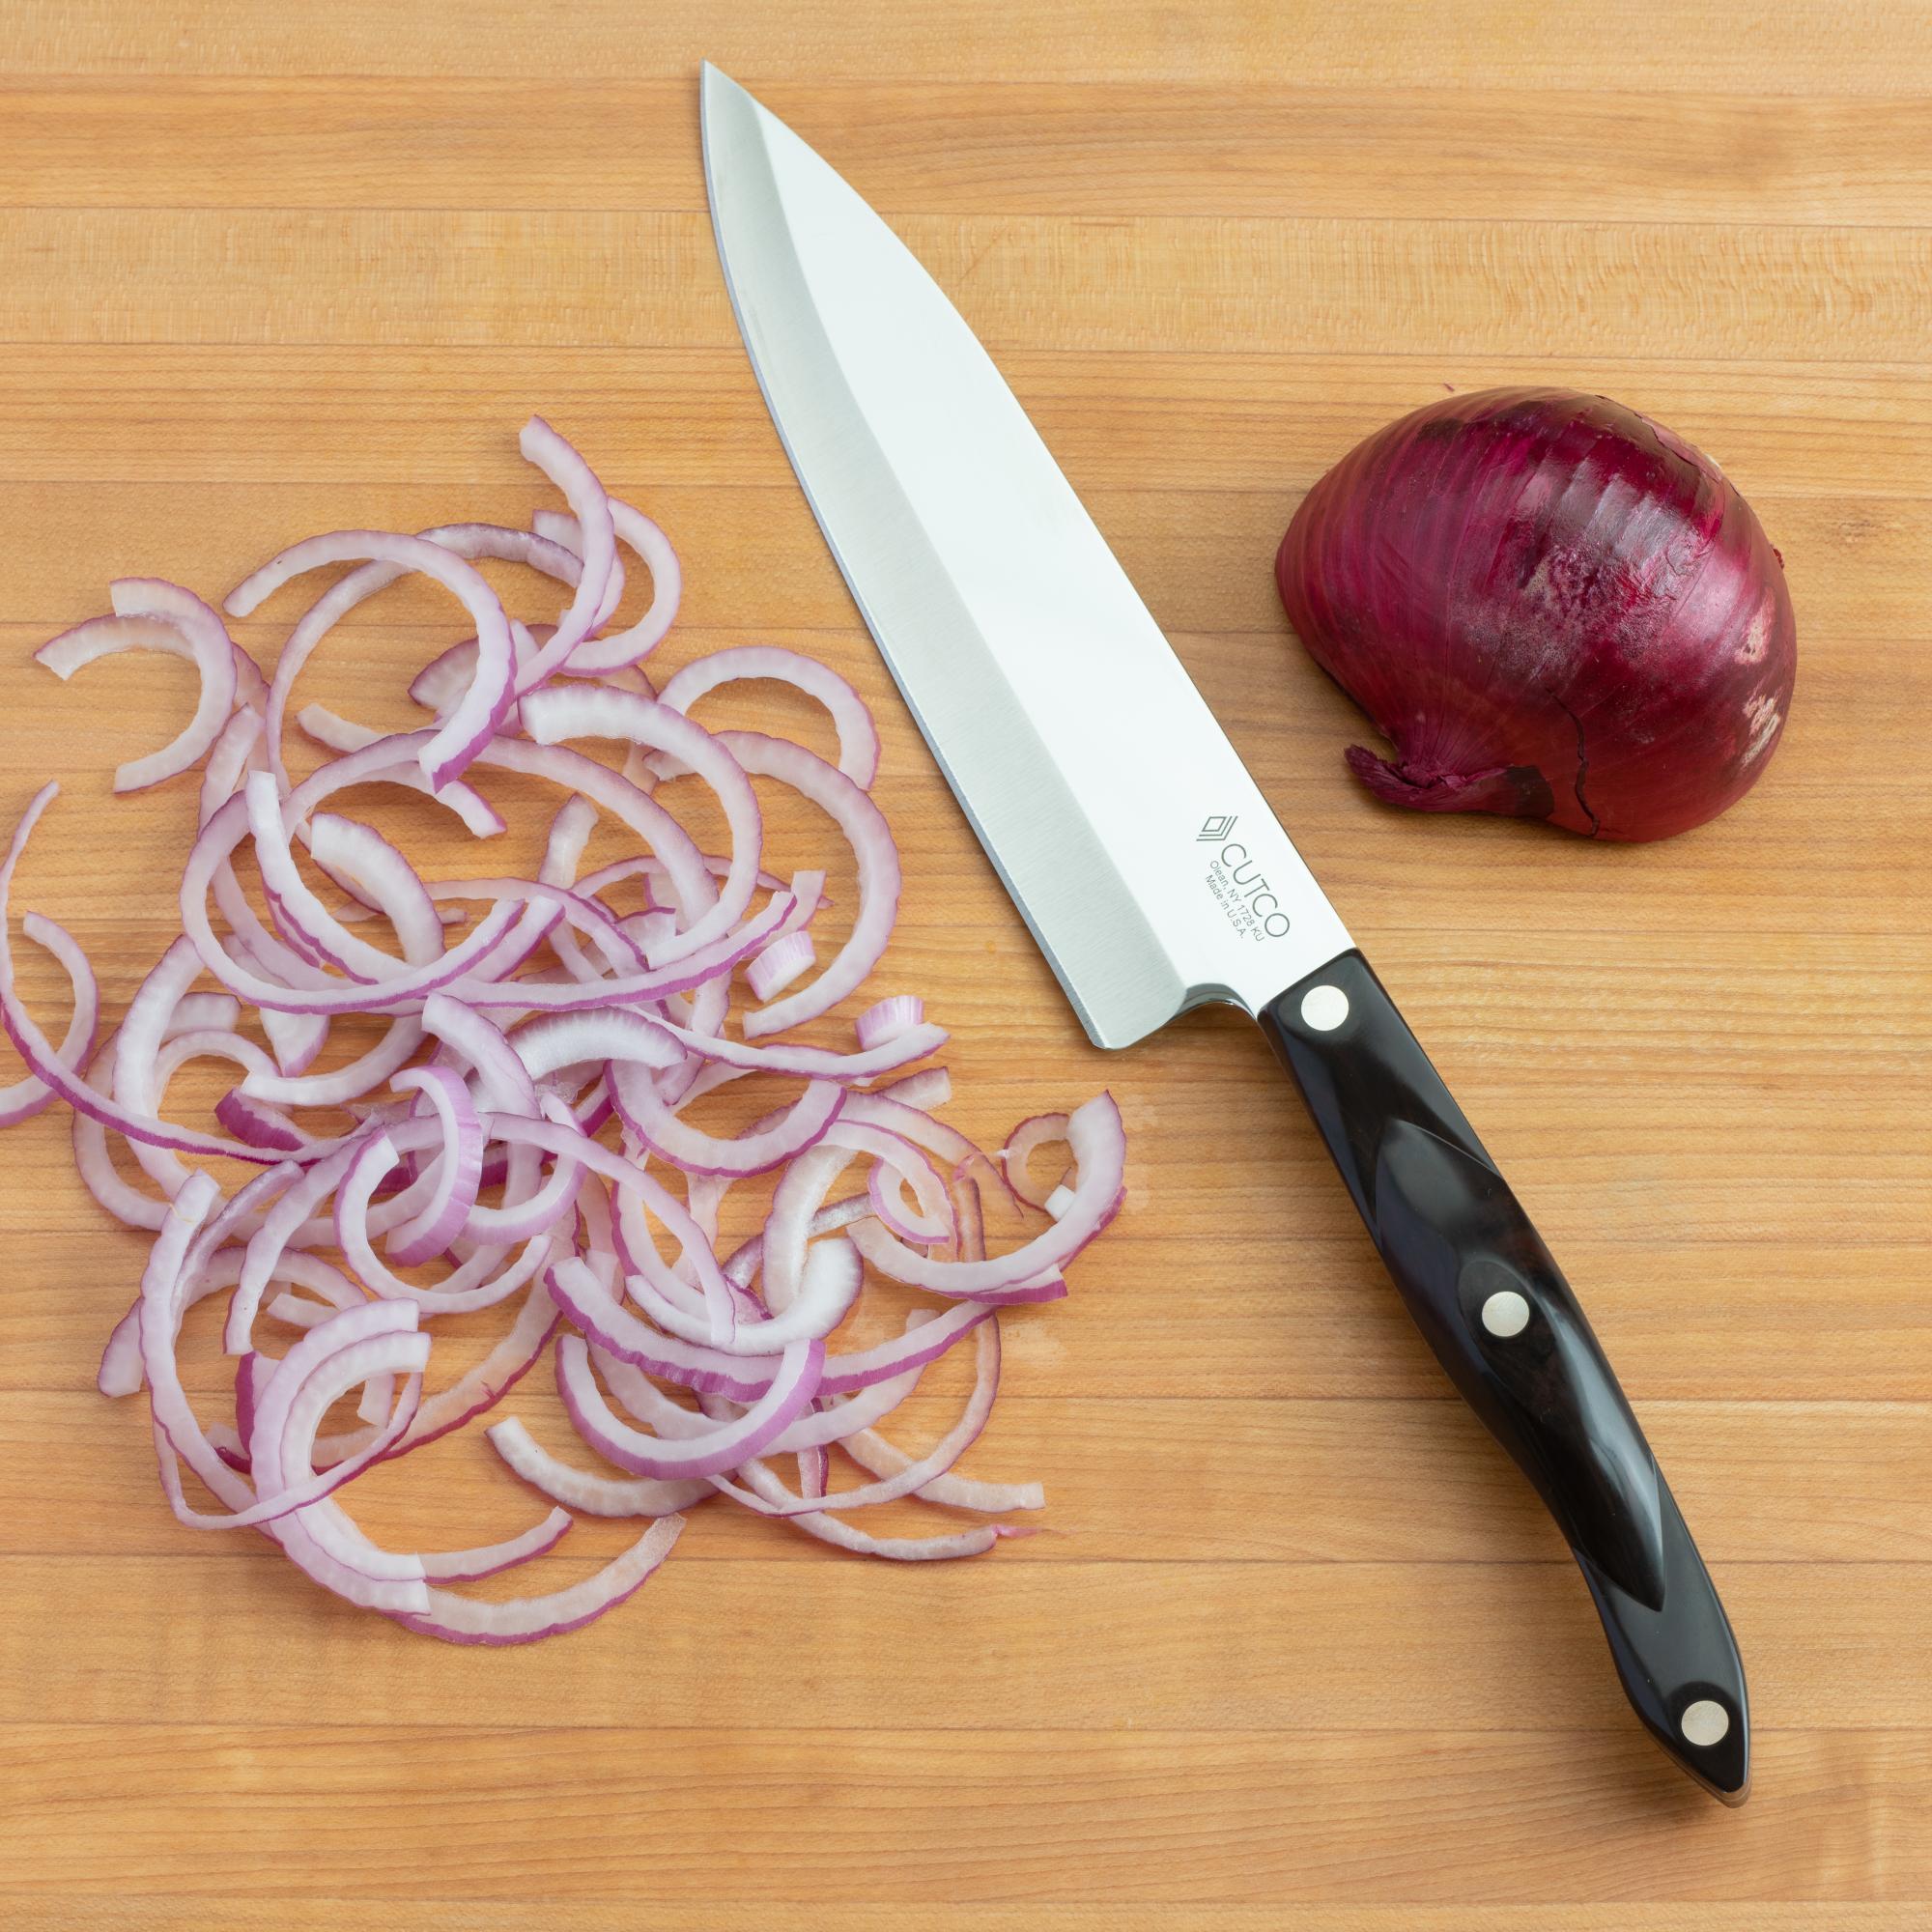 Using a Petite Chef to thinly slice onion.